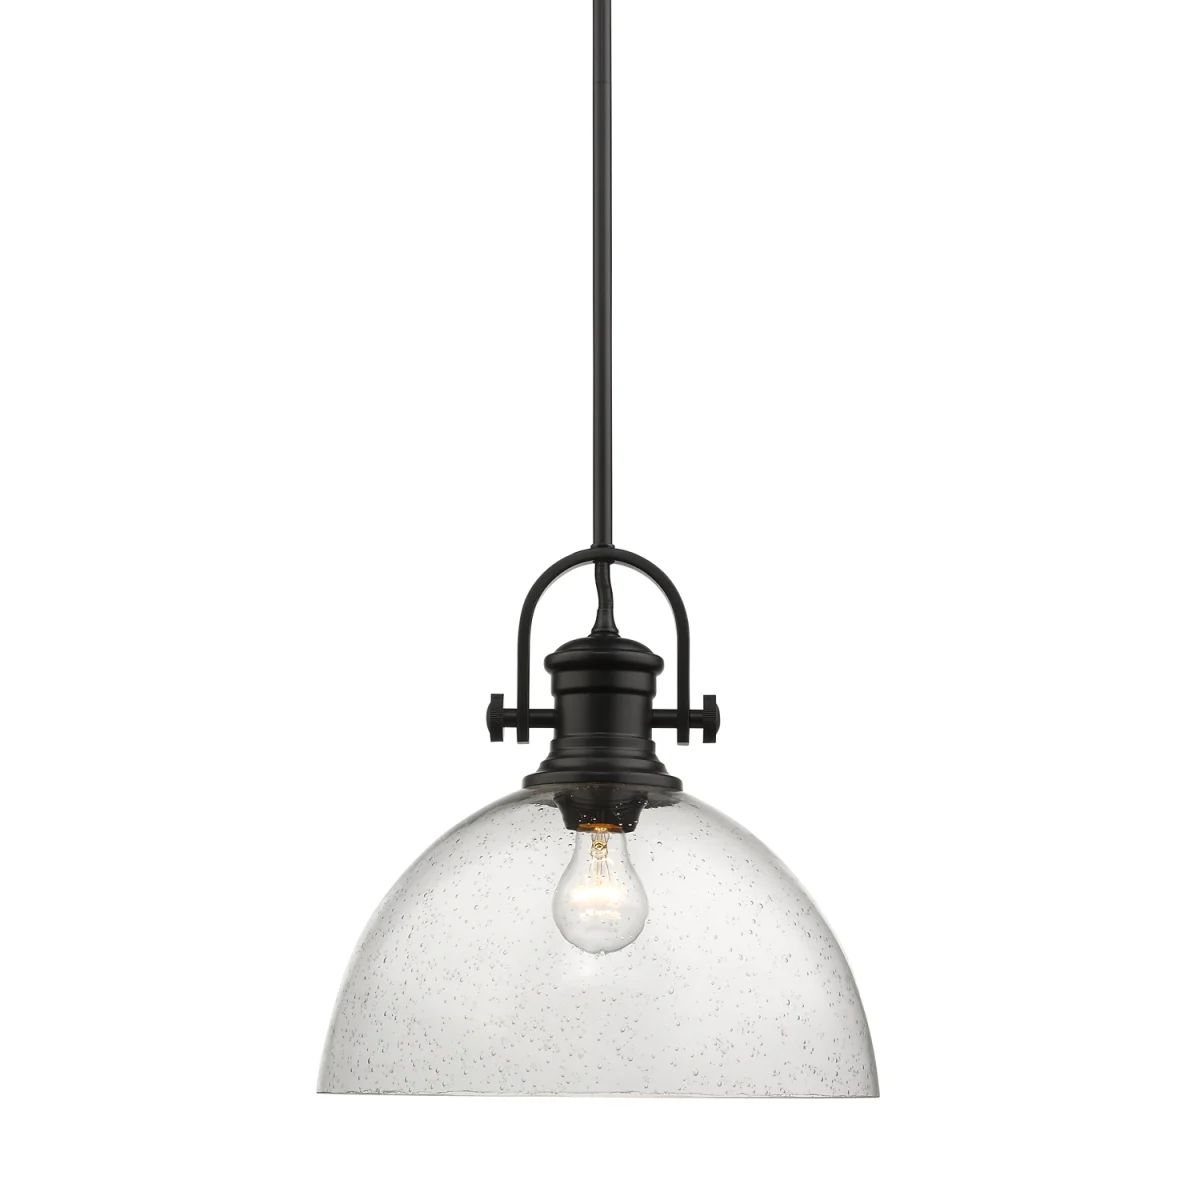 Hines Single Light 13-1/2" Wide Pendant with Seeded Glass Shade | Build.com, Inc.